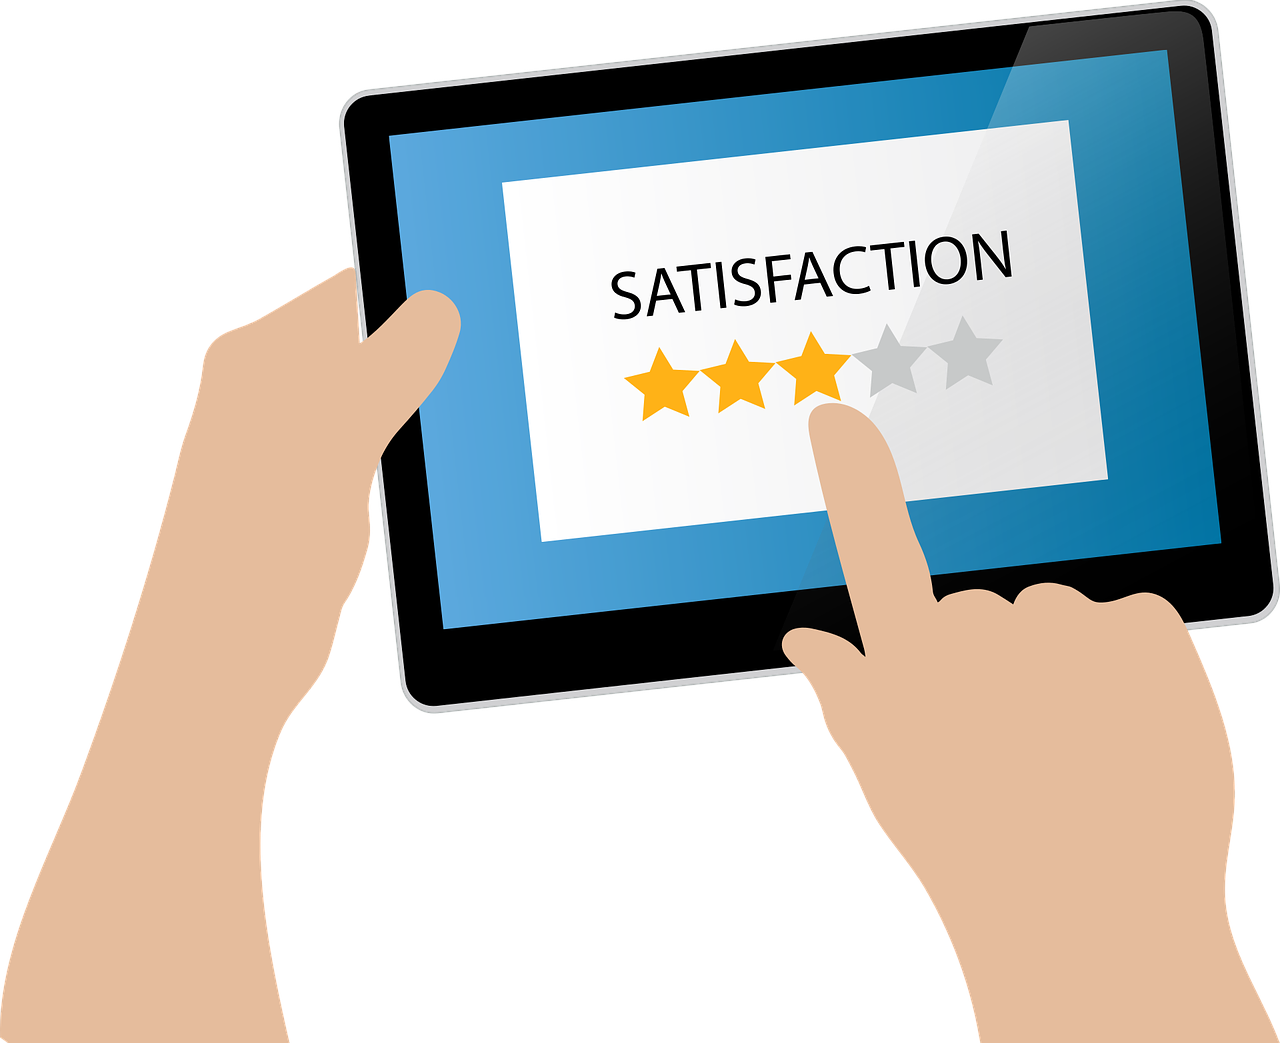 Active ESG Share: Illustration by Julie McMurrie from Pixabay showing a satisfaction rating